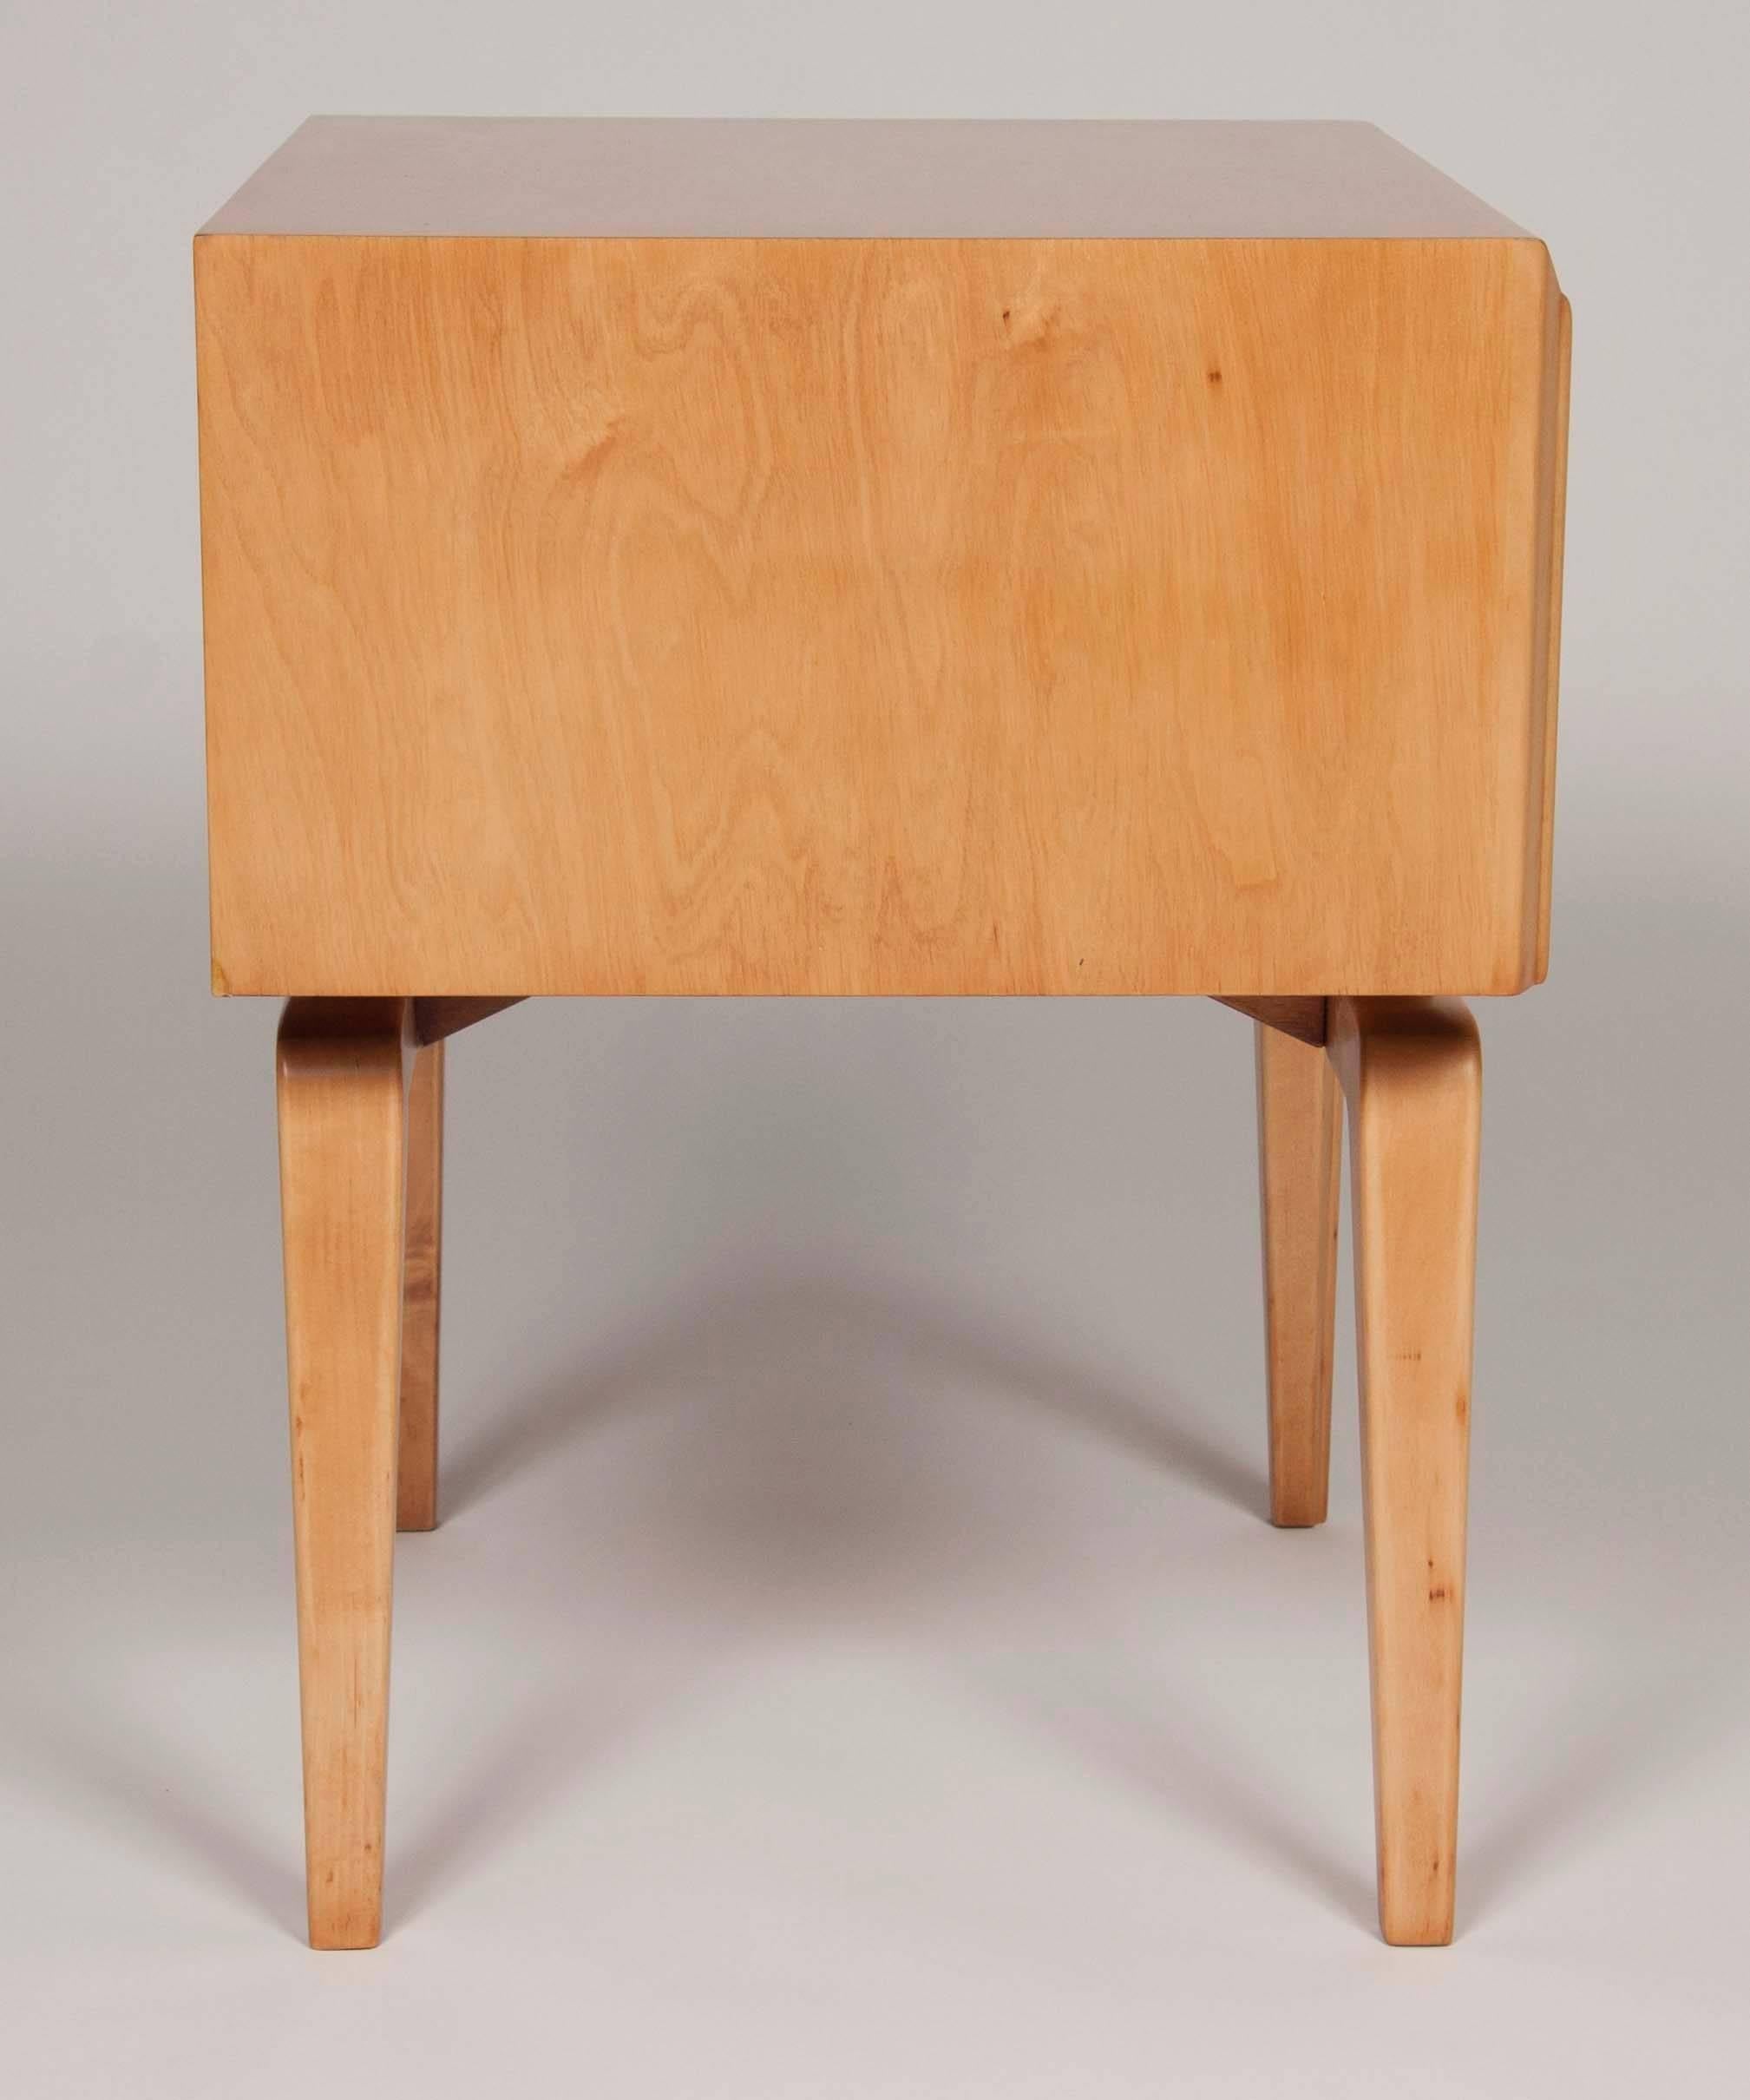 Birch Pair of Bedside Tables by Edmond Spence